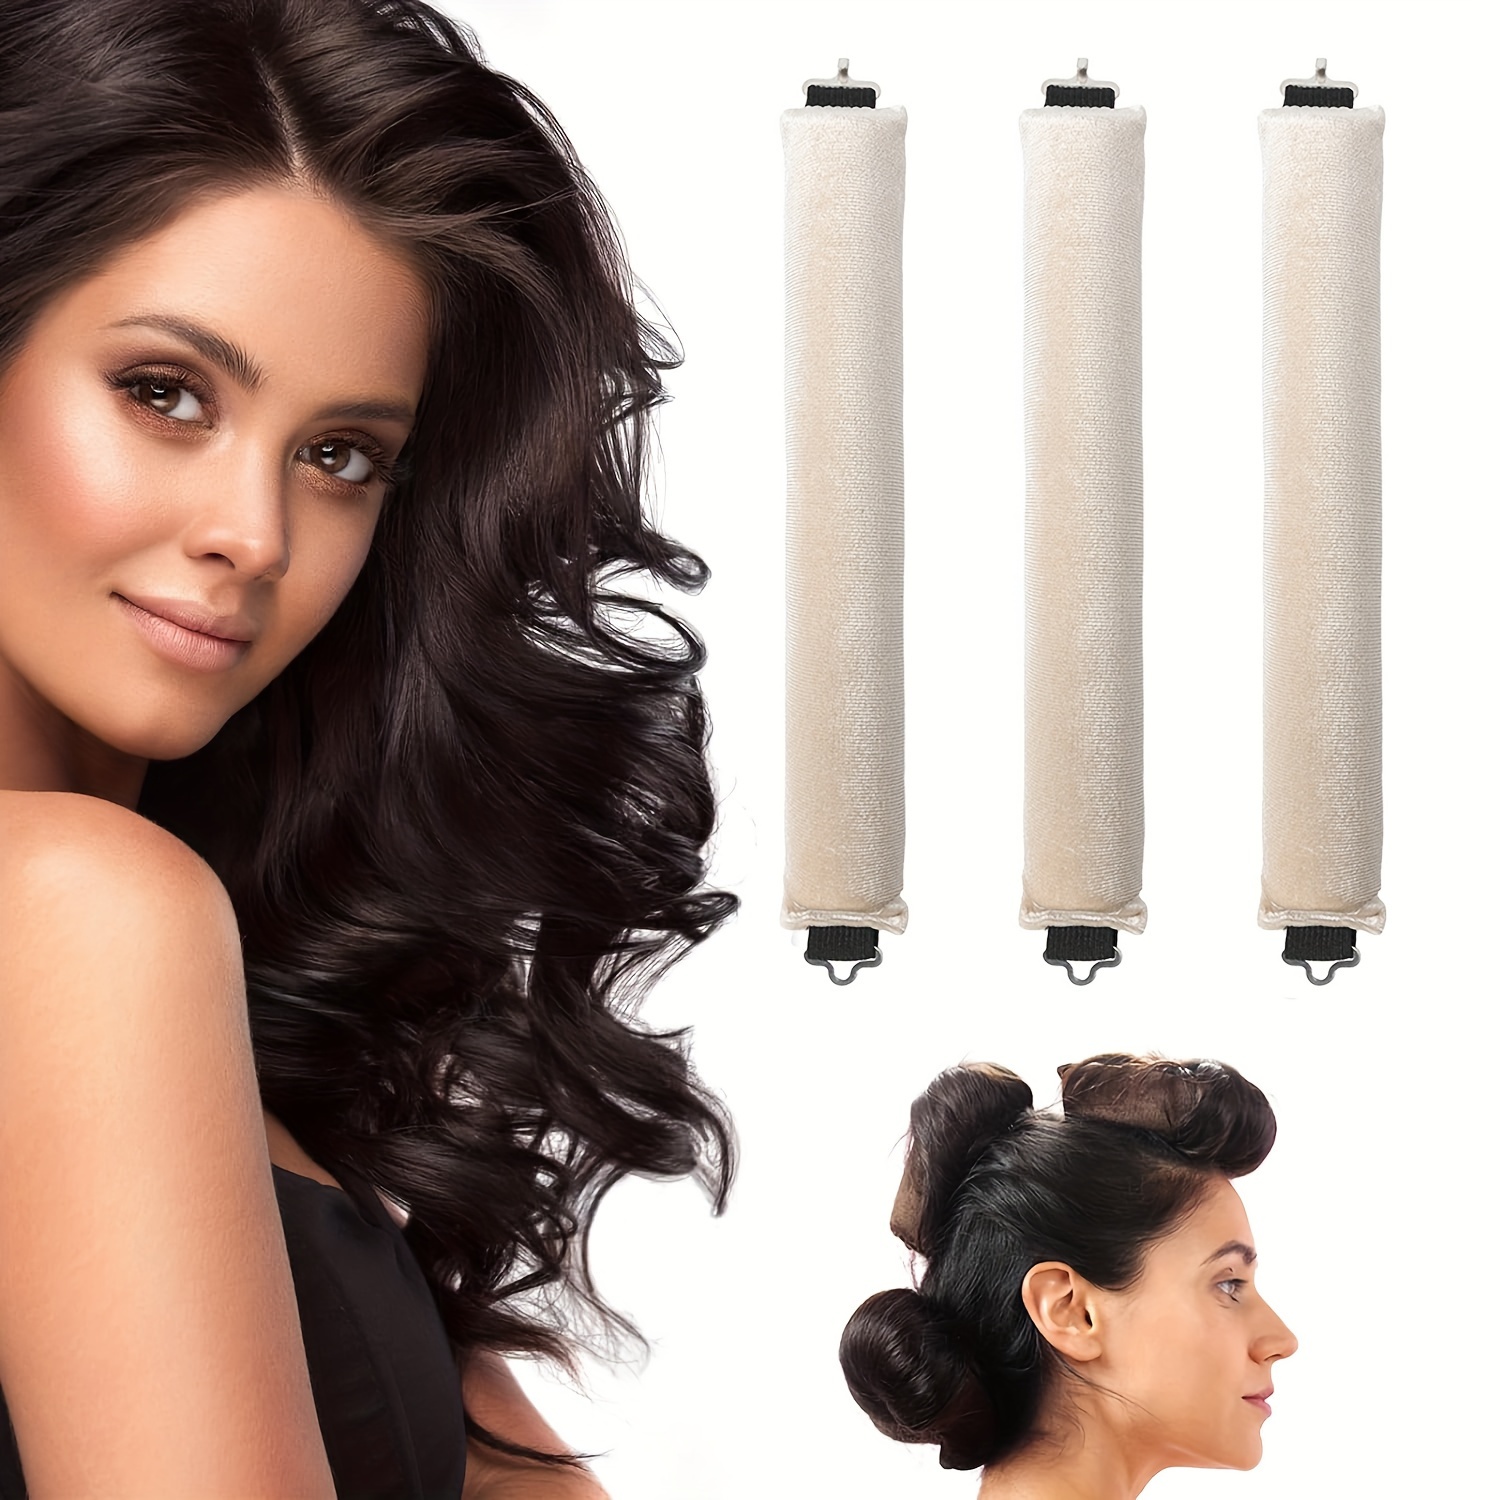 

3pcs Overnight Curlers, Heatless Rod Head Blow Out, Big Rod Sleep Curler Set, Wavy Styling Tool Without Heat